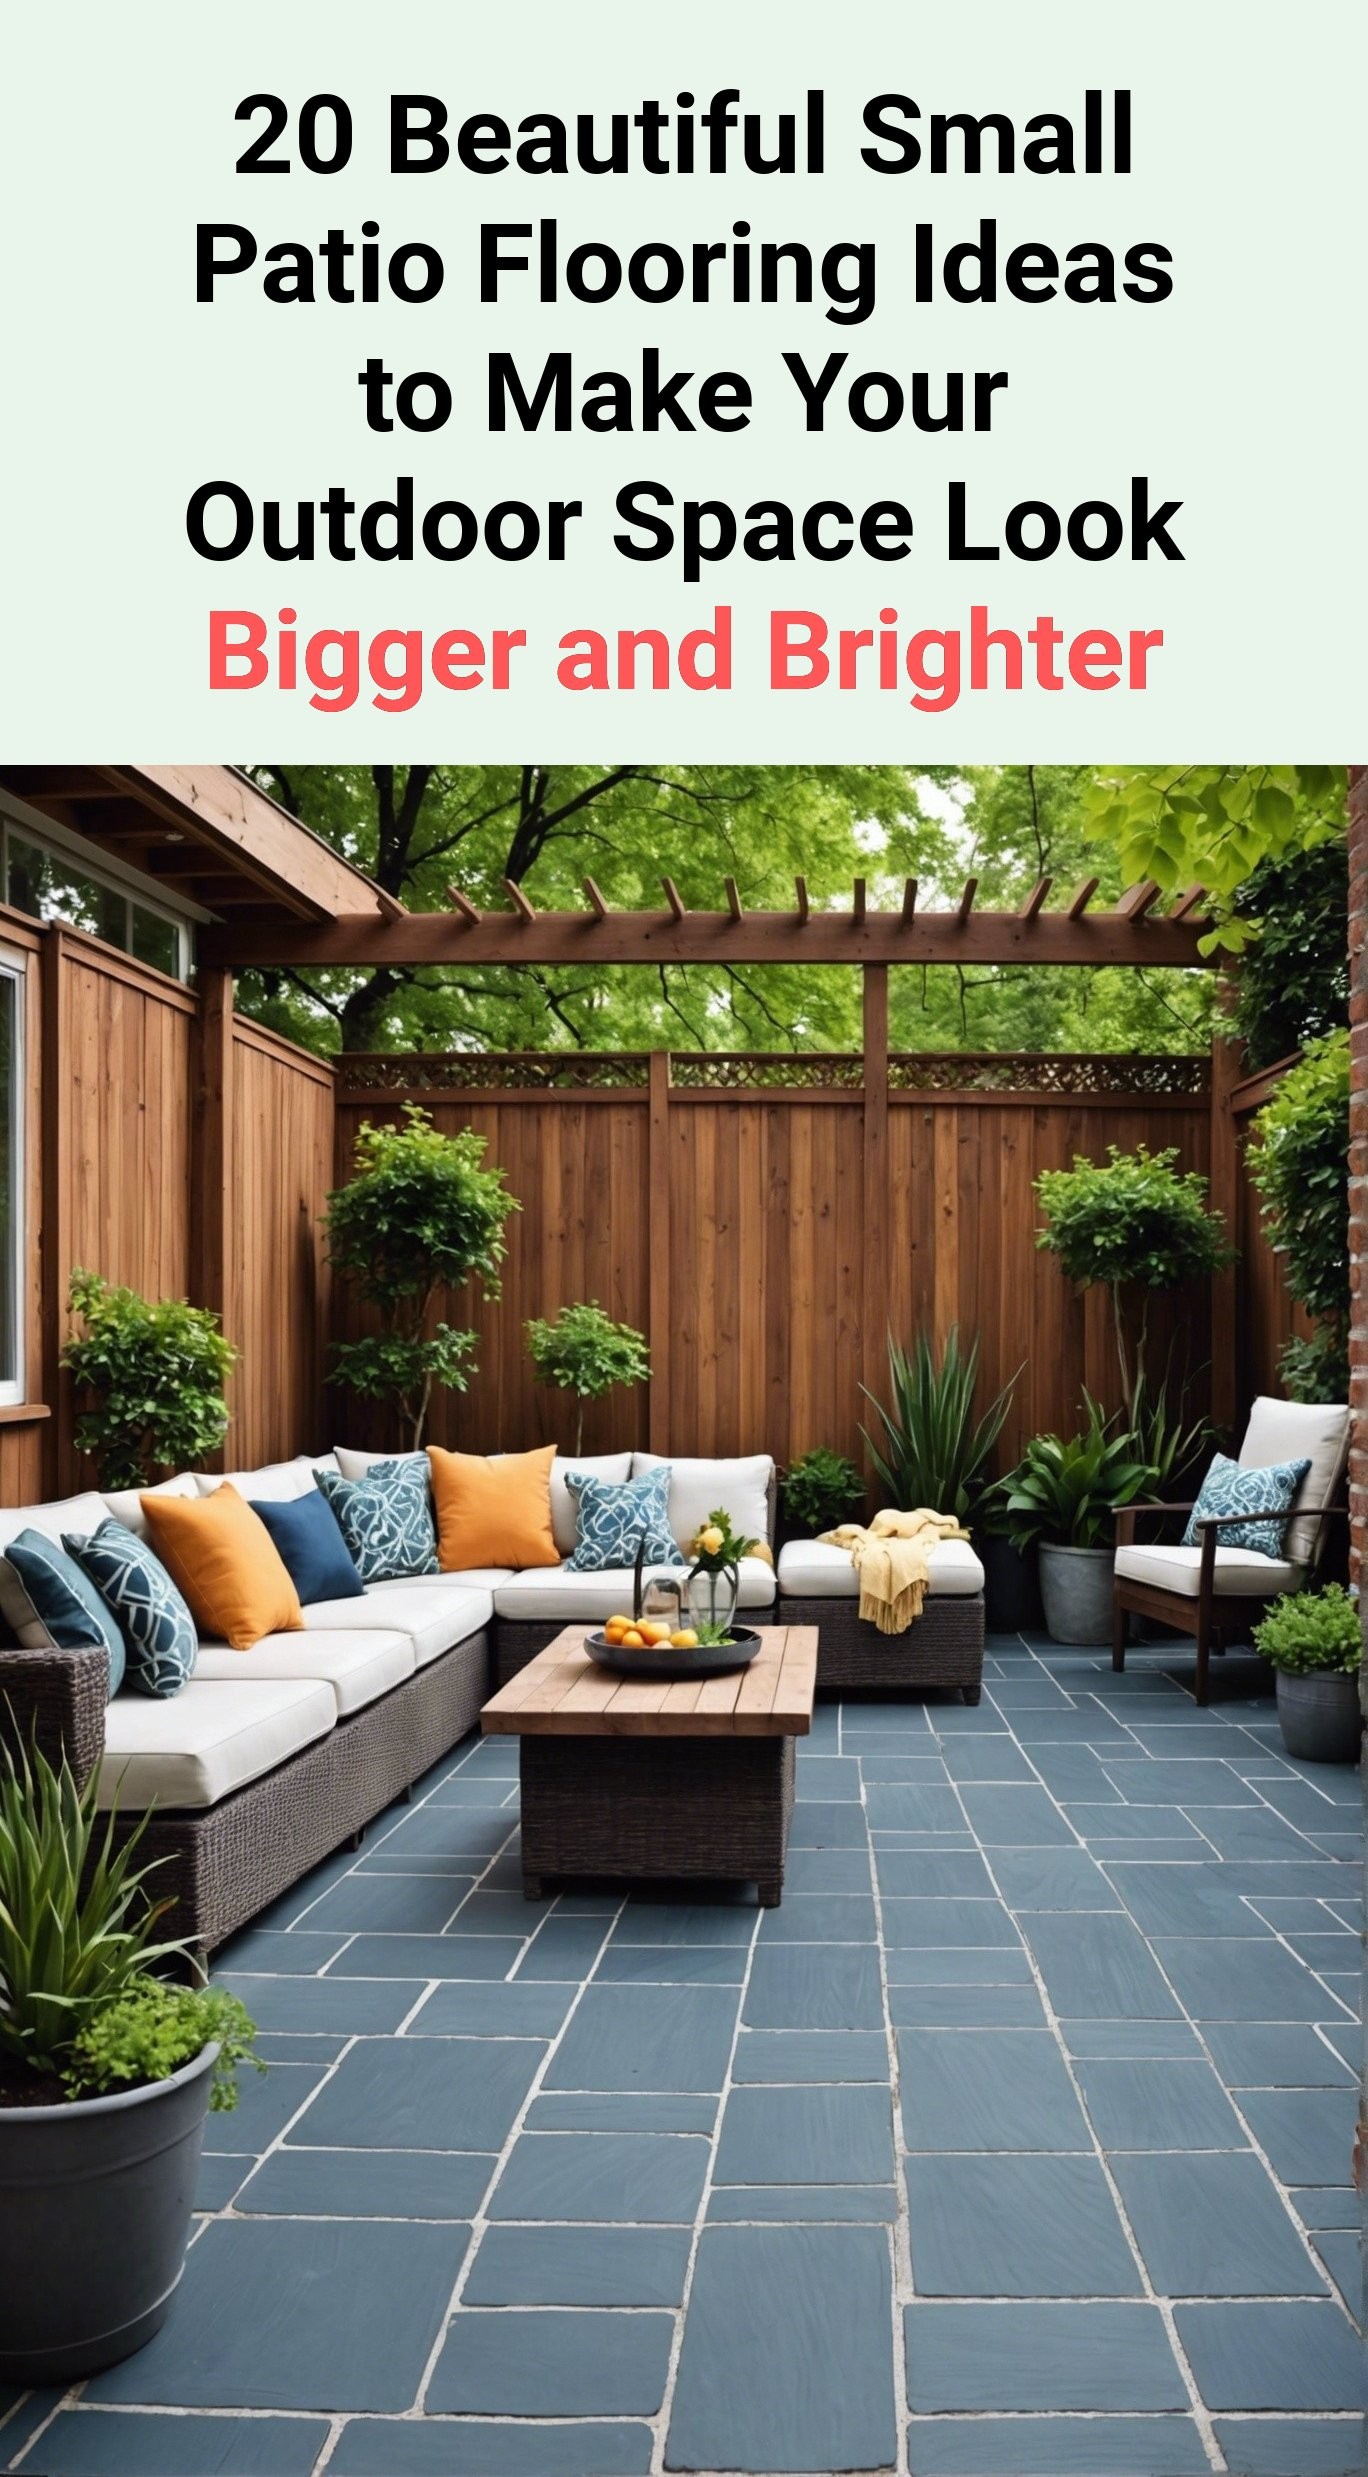 20 Beautiful Small Patio Flooring Ideas to Make Your Outdoor Space Look Bigger and Brighter